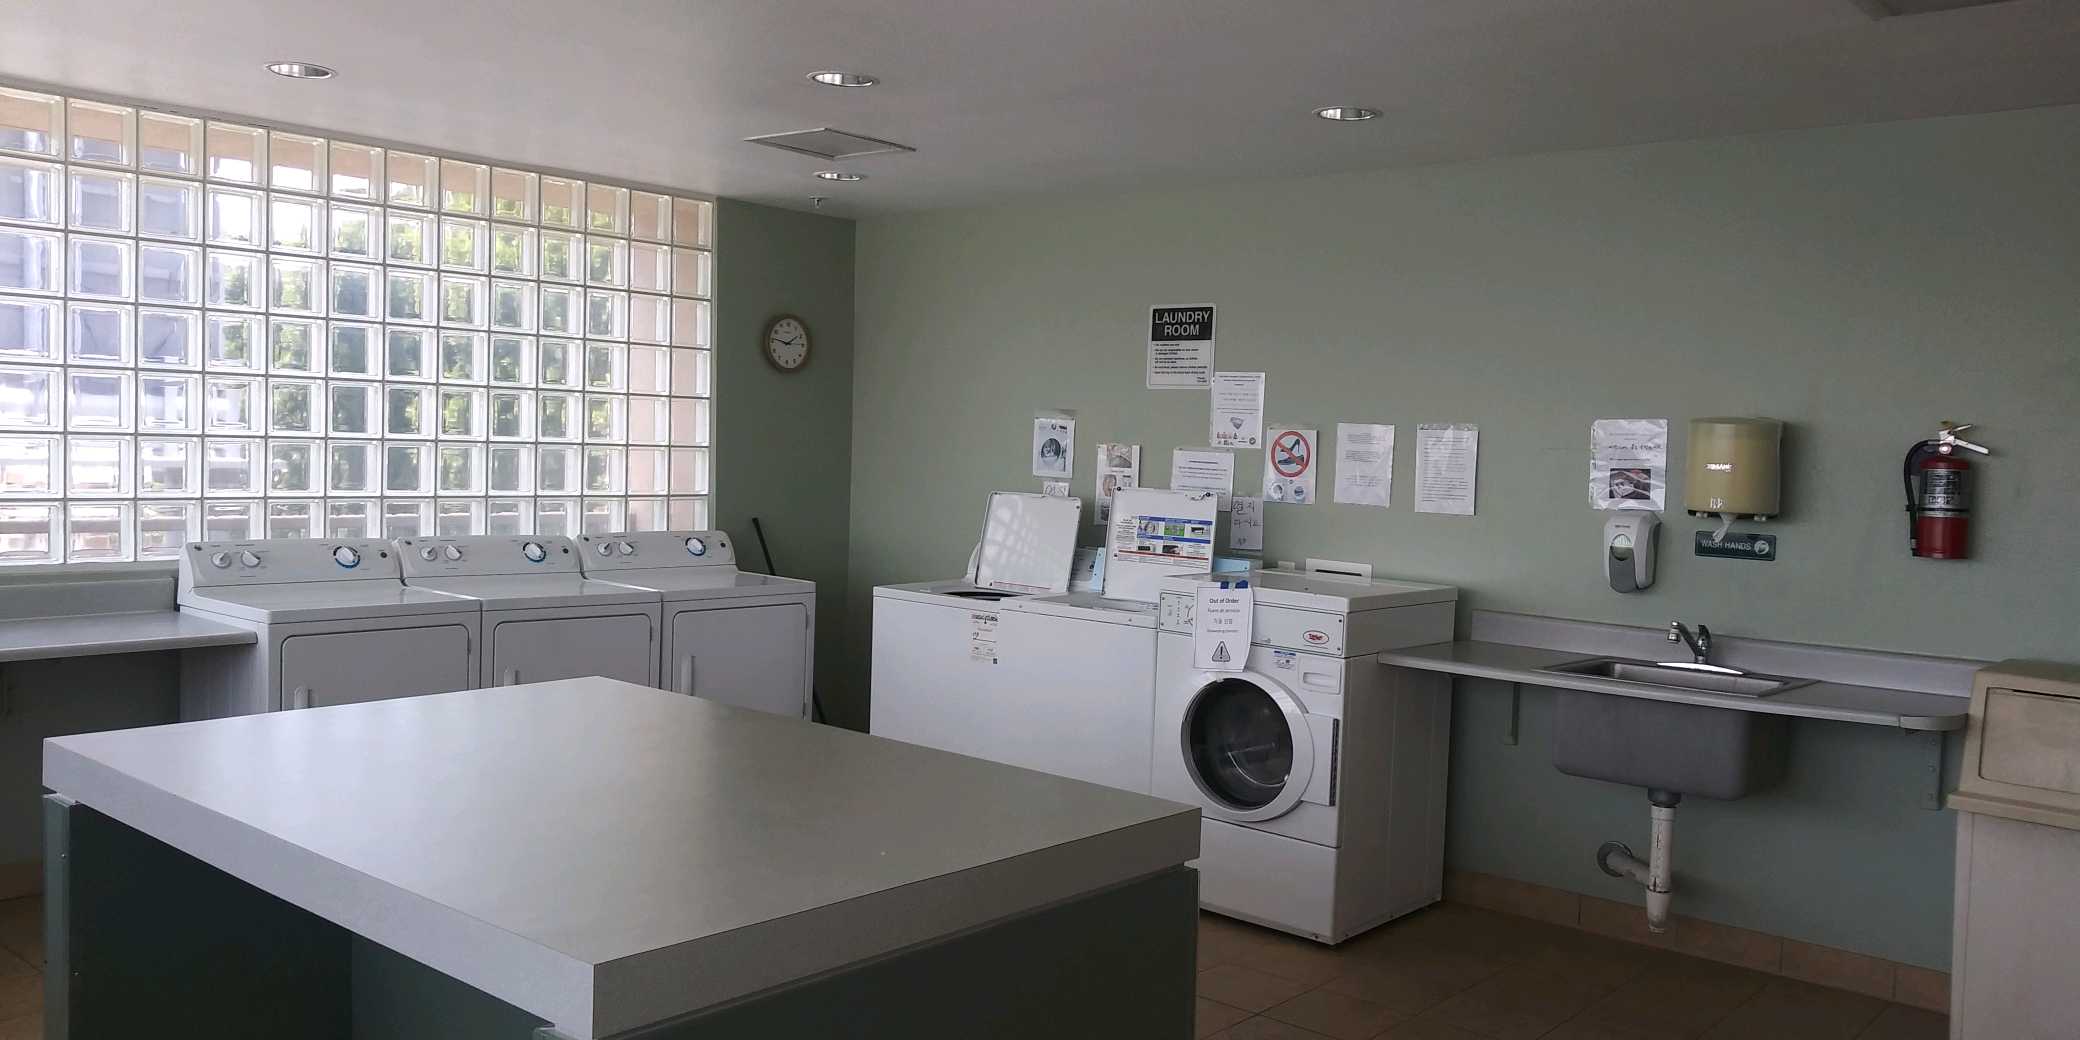 Laundry room with multiple washers and dryers. Center has a folding table. There is a large tiled window on one side of the wall. On the adjacent wall there are laundry room rules and signs posted. Thre is a sink, soap dispenser, paper towel dispenser, tr